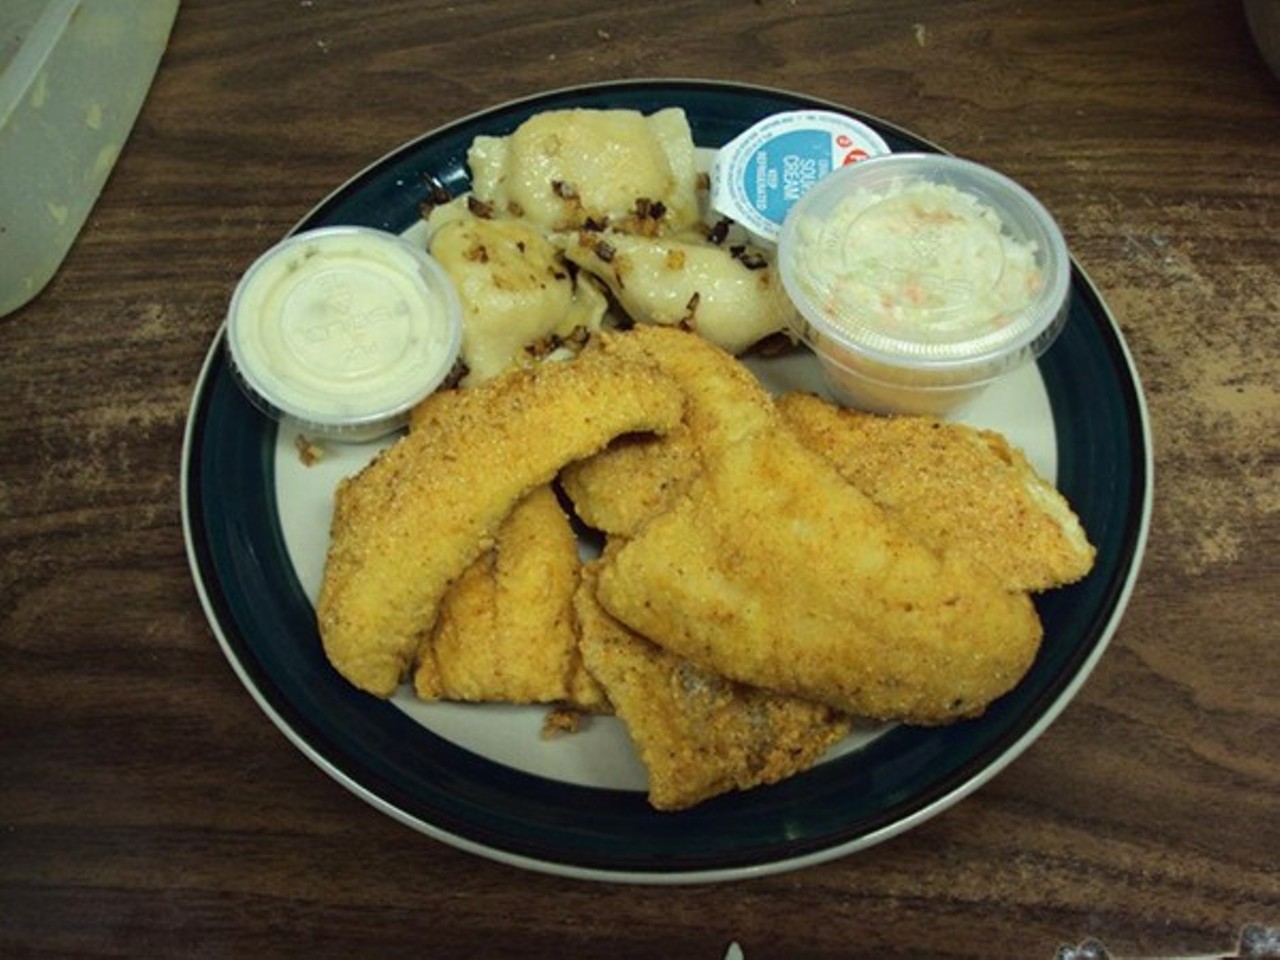  The Little Polish Diner
5772 Ridge Rd., Parma
Known for its homestyle Polish cooking, The Little Polish Diner offers a traditional Perch fish fry every Friday throughout Lent. And in authentic Cleveland style, the potato side is pierogis instead of french fries if you want them. 
Photo via The Little Polish Diner/Facebook